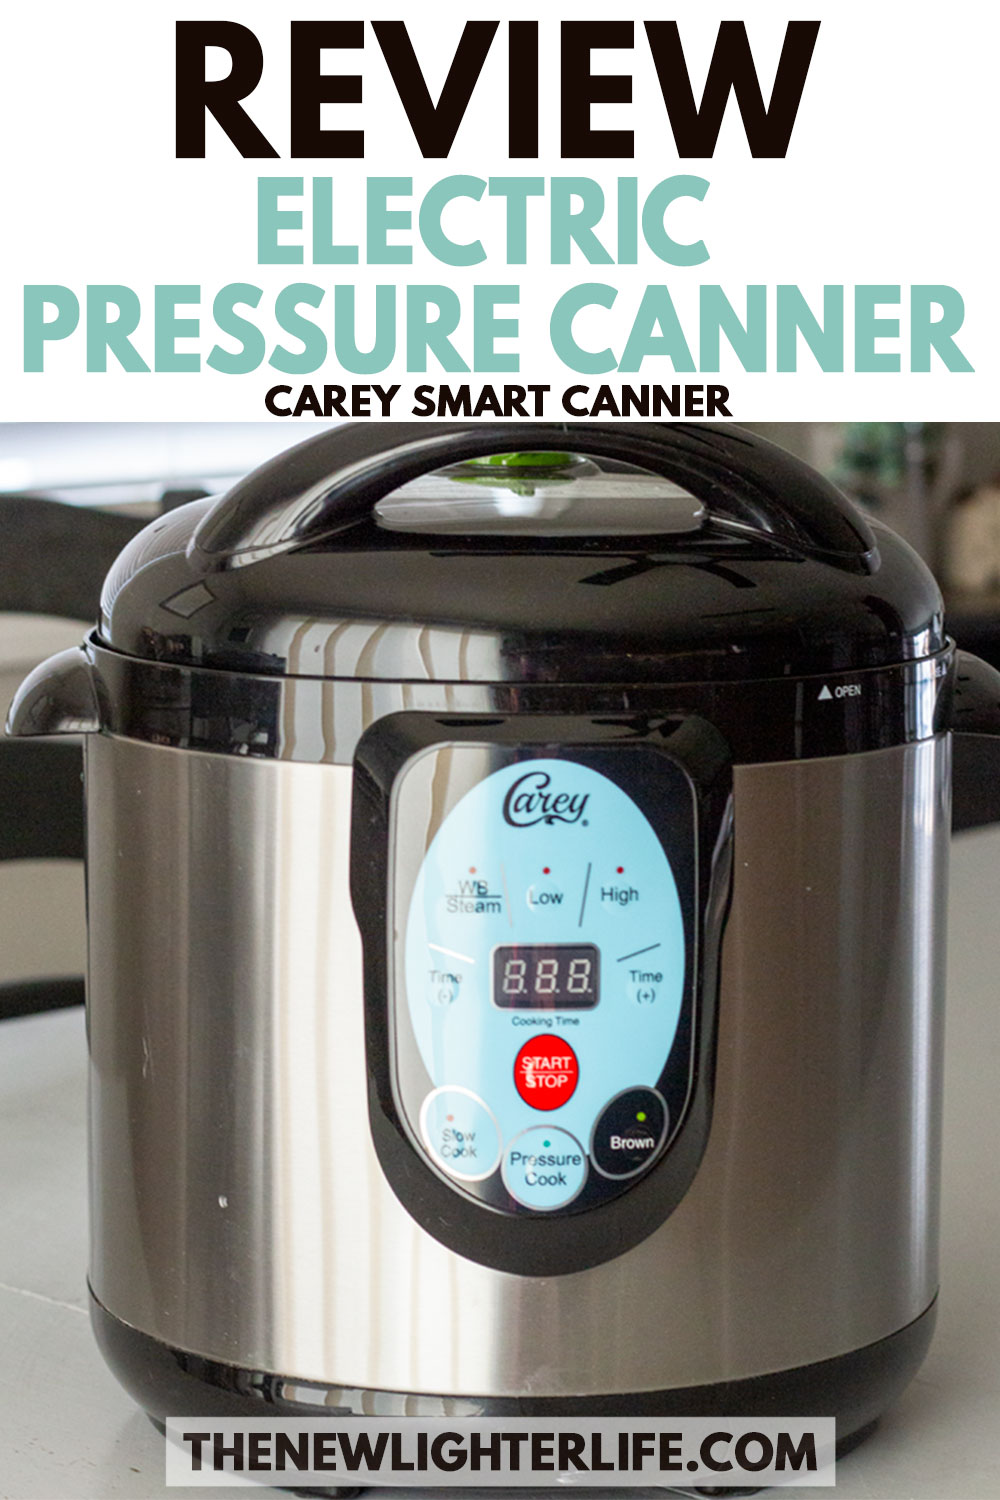 Electric Pressure Canners? Review of Carey Smart Canner